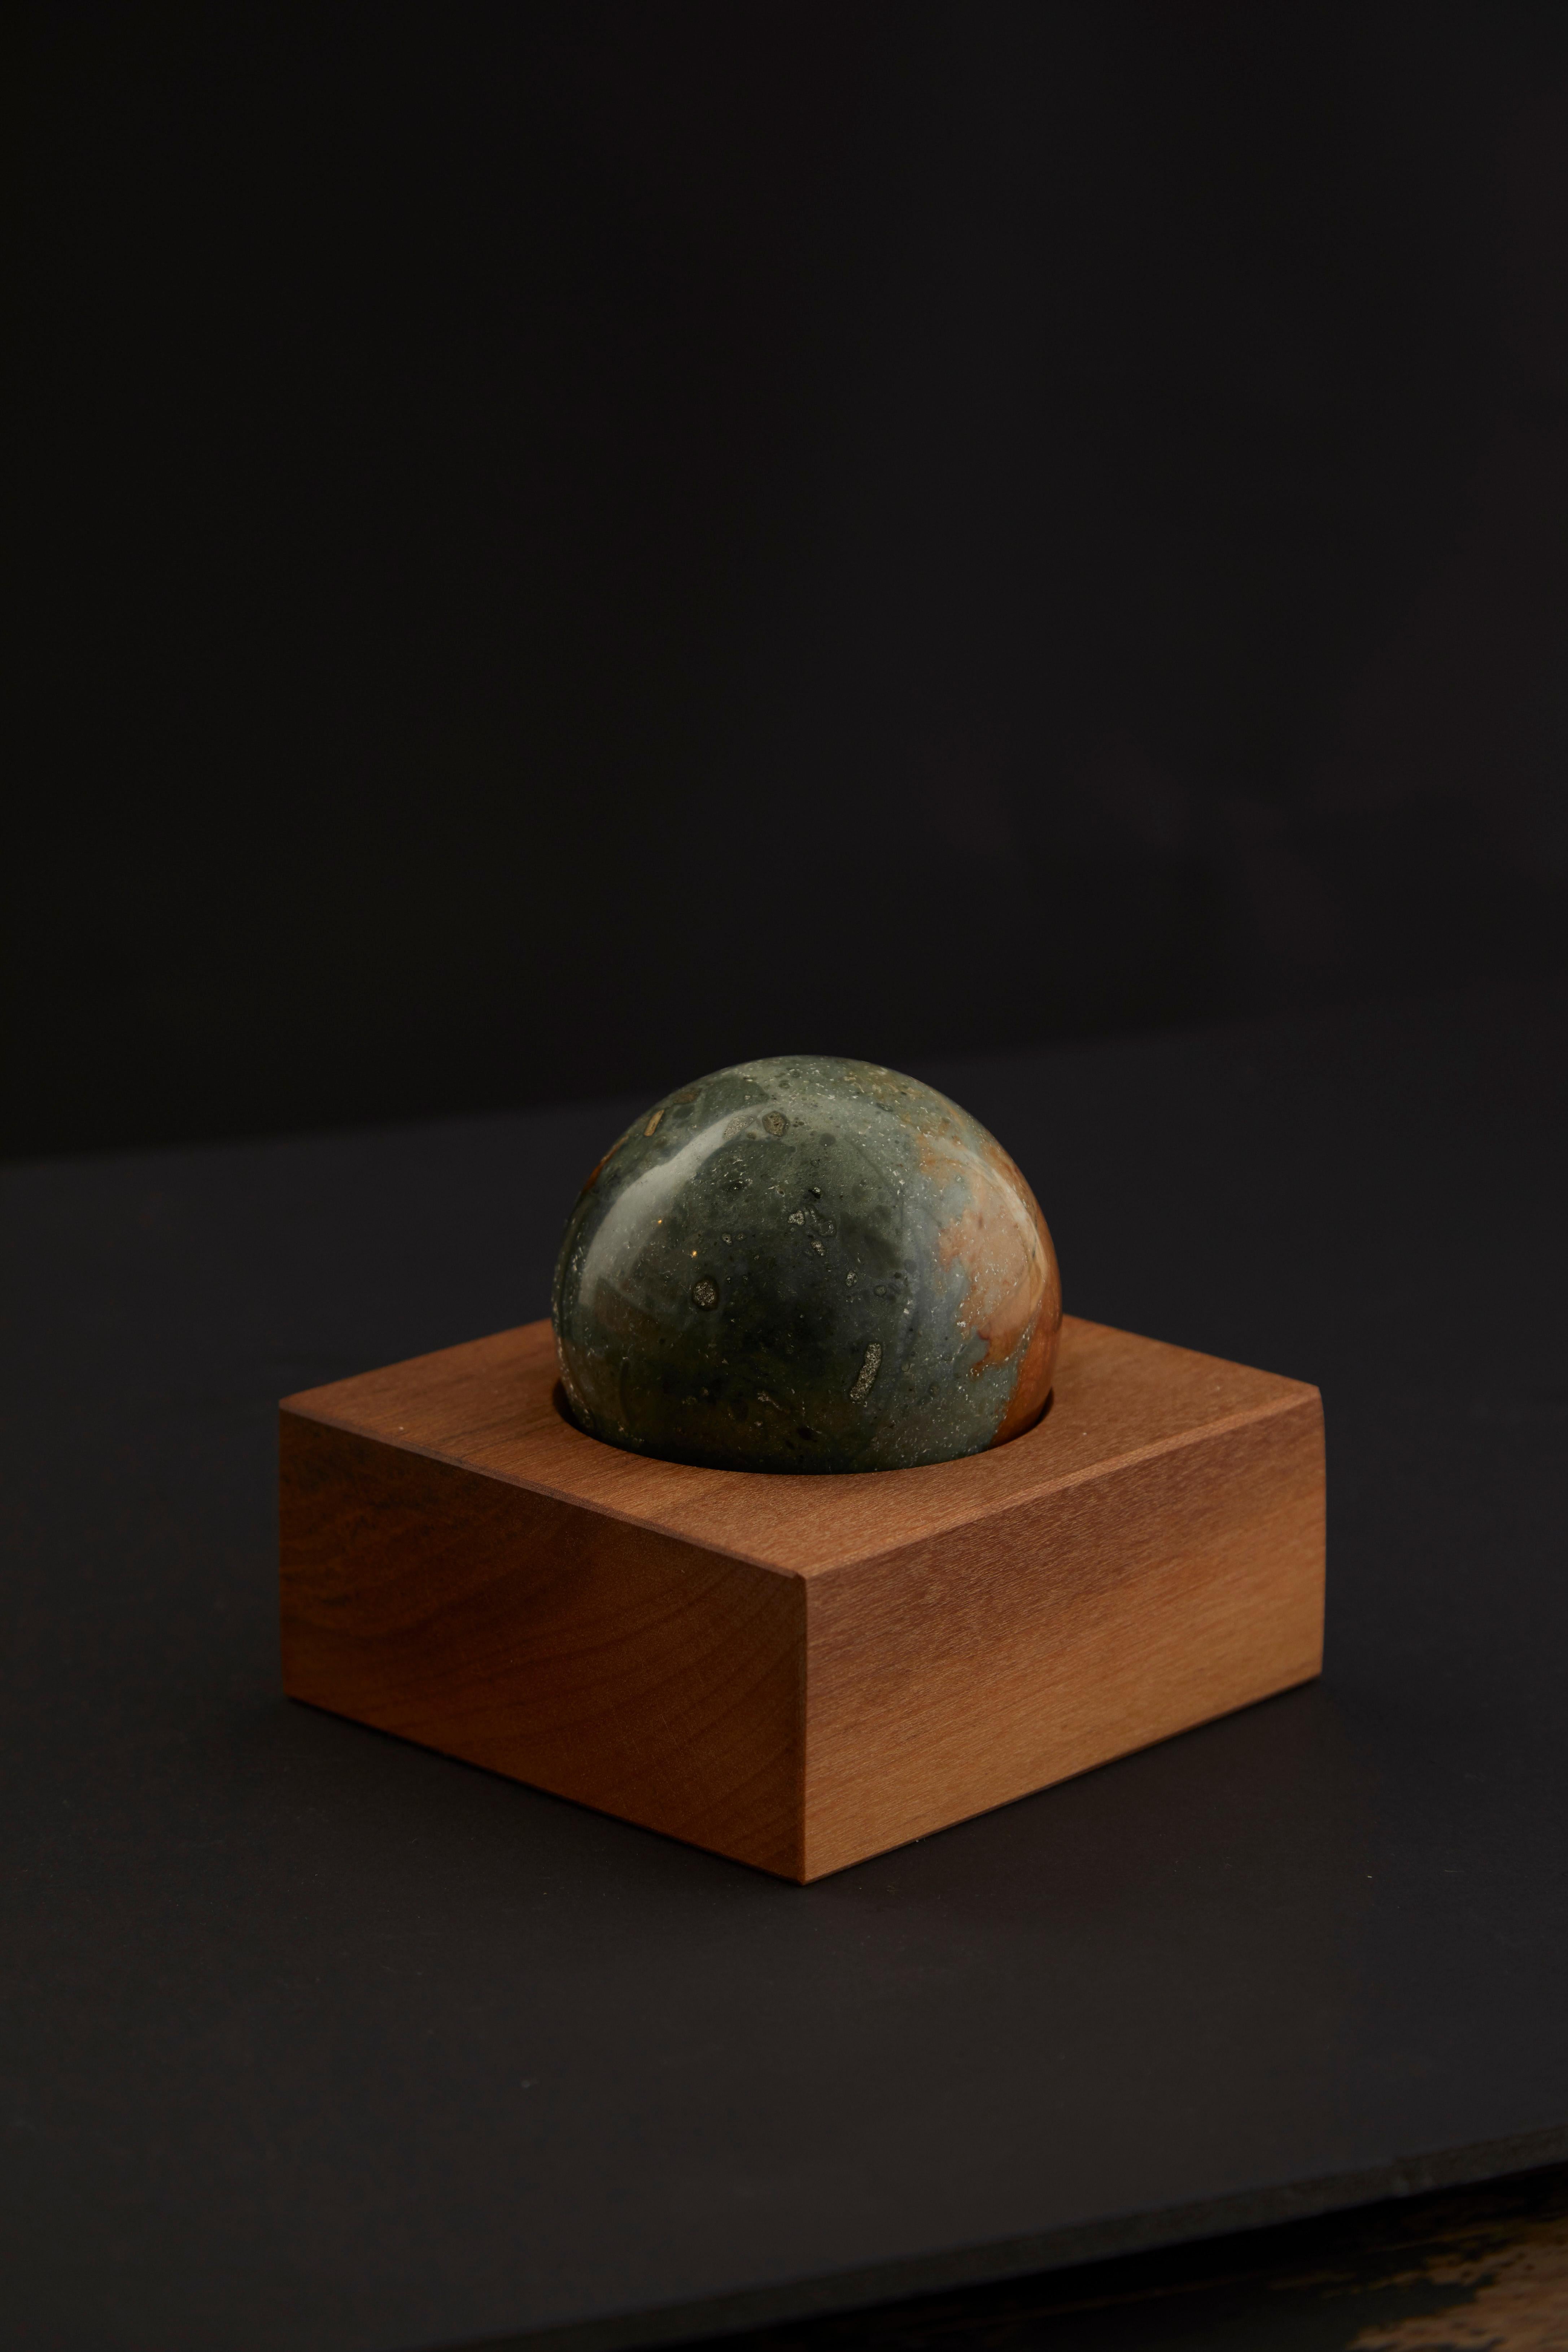 Let herbs and spices show off their true flavors with this beautiful gemstone and wood piece. This mortar will not only bring out the true essence and aroma of your traditional spices, it will also look great on your kitchen counter. 

The mortar